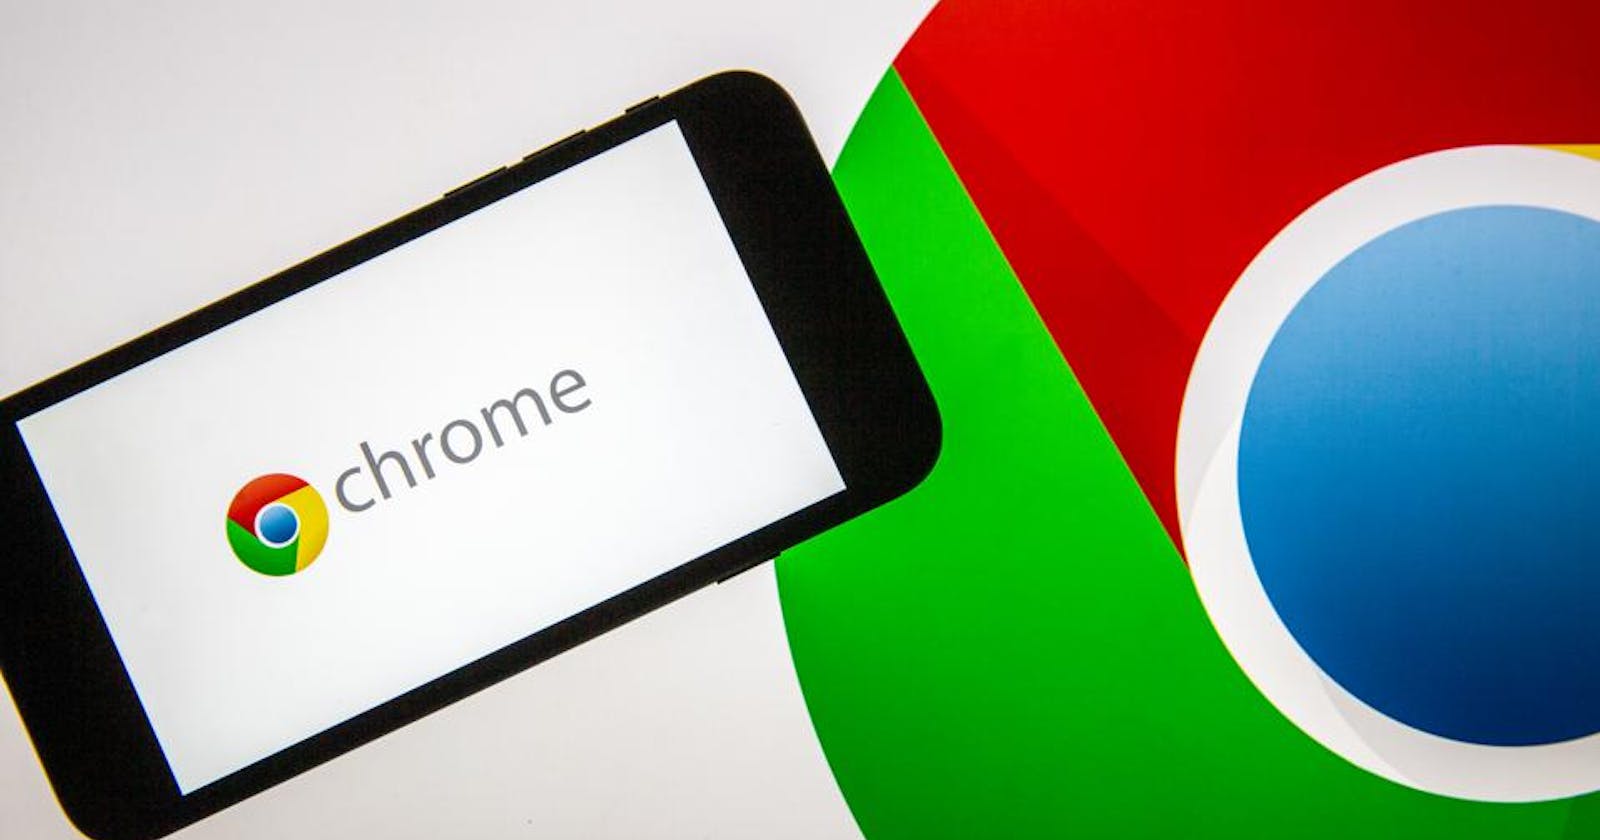 Google Chrome For Android - A Comprehensive User Guide